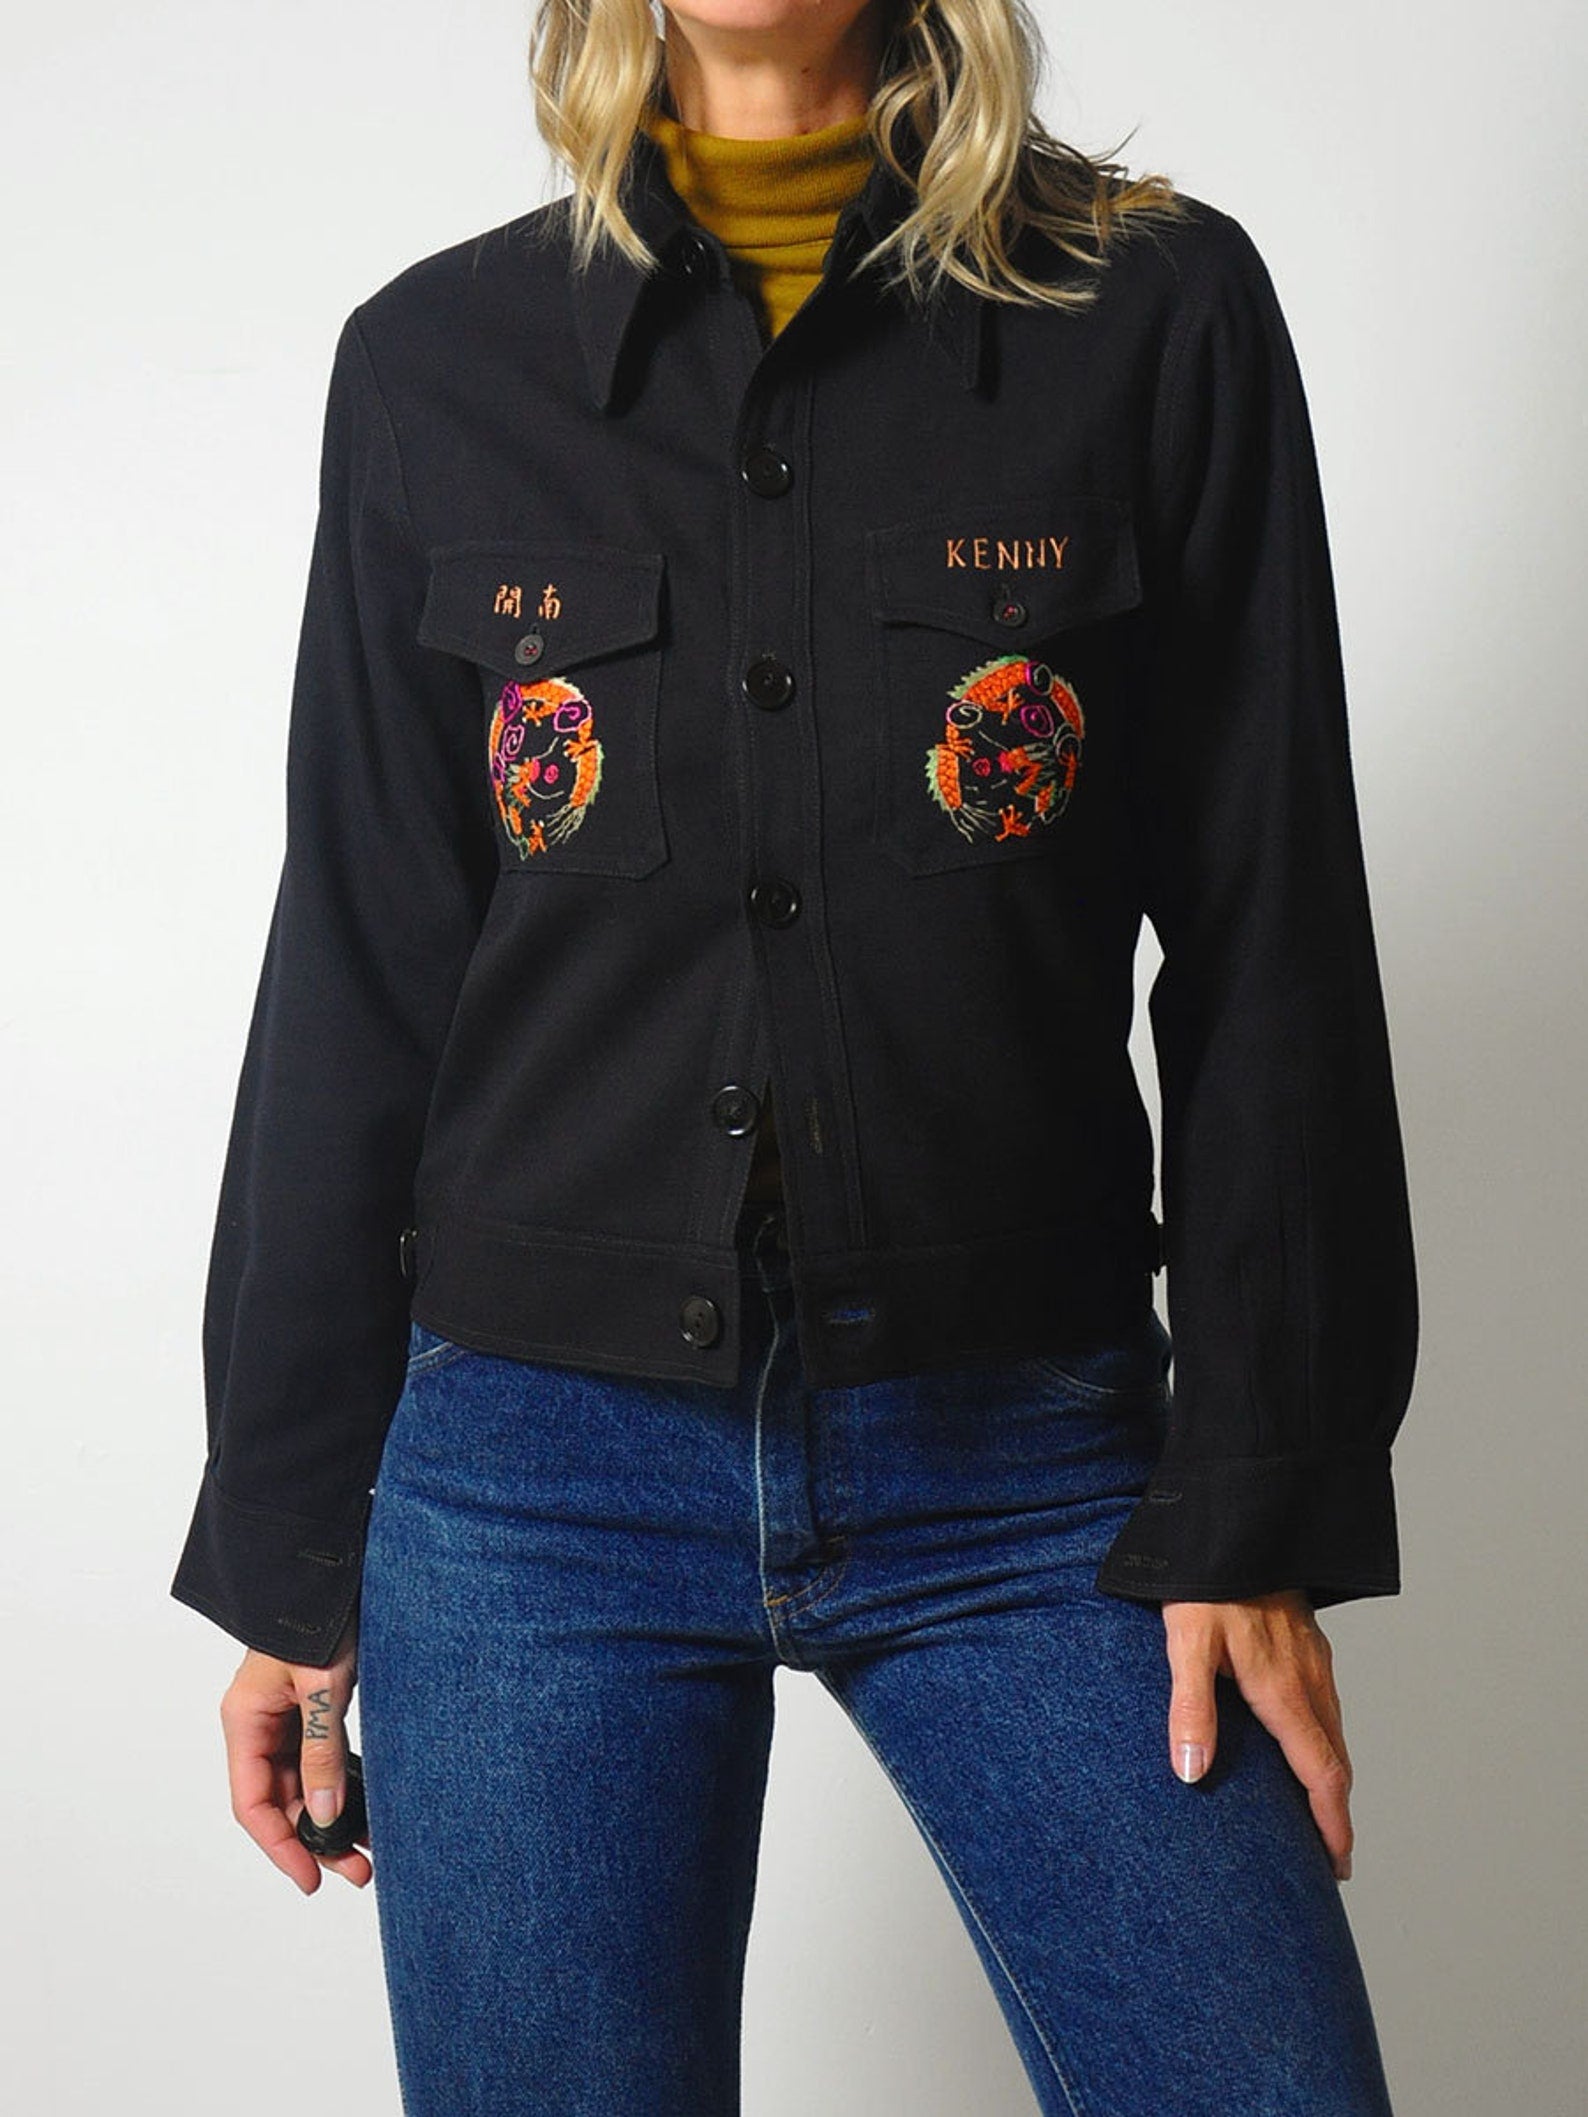 1940's Wool Embroidered WWII Souvenir Jacket